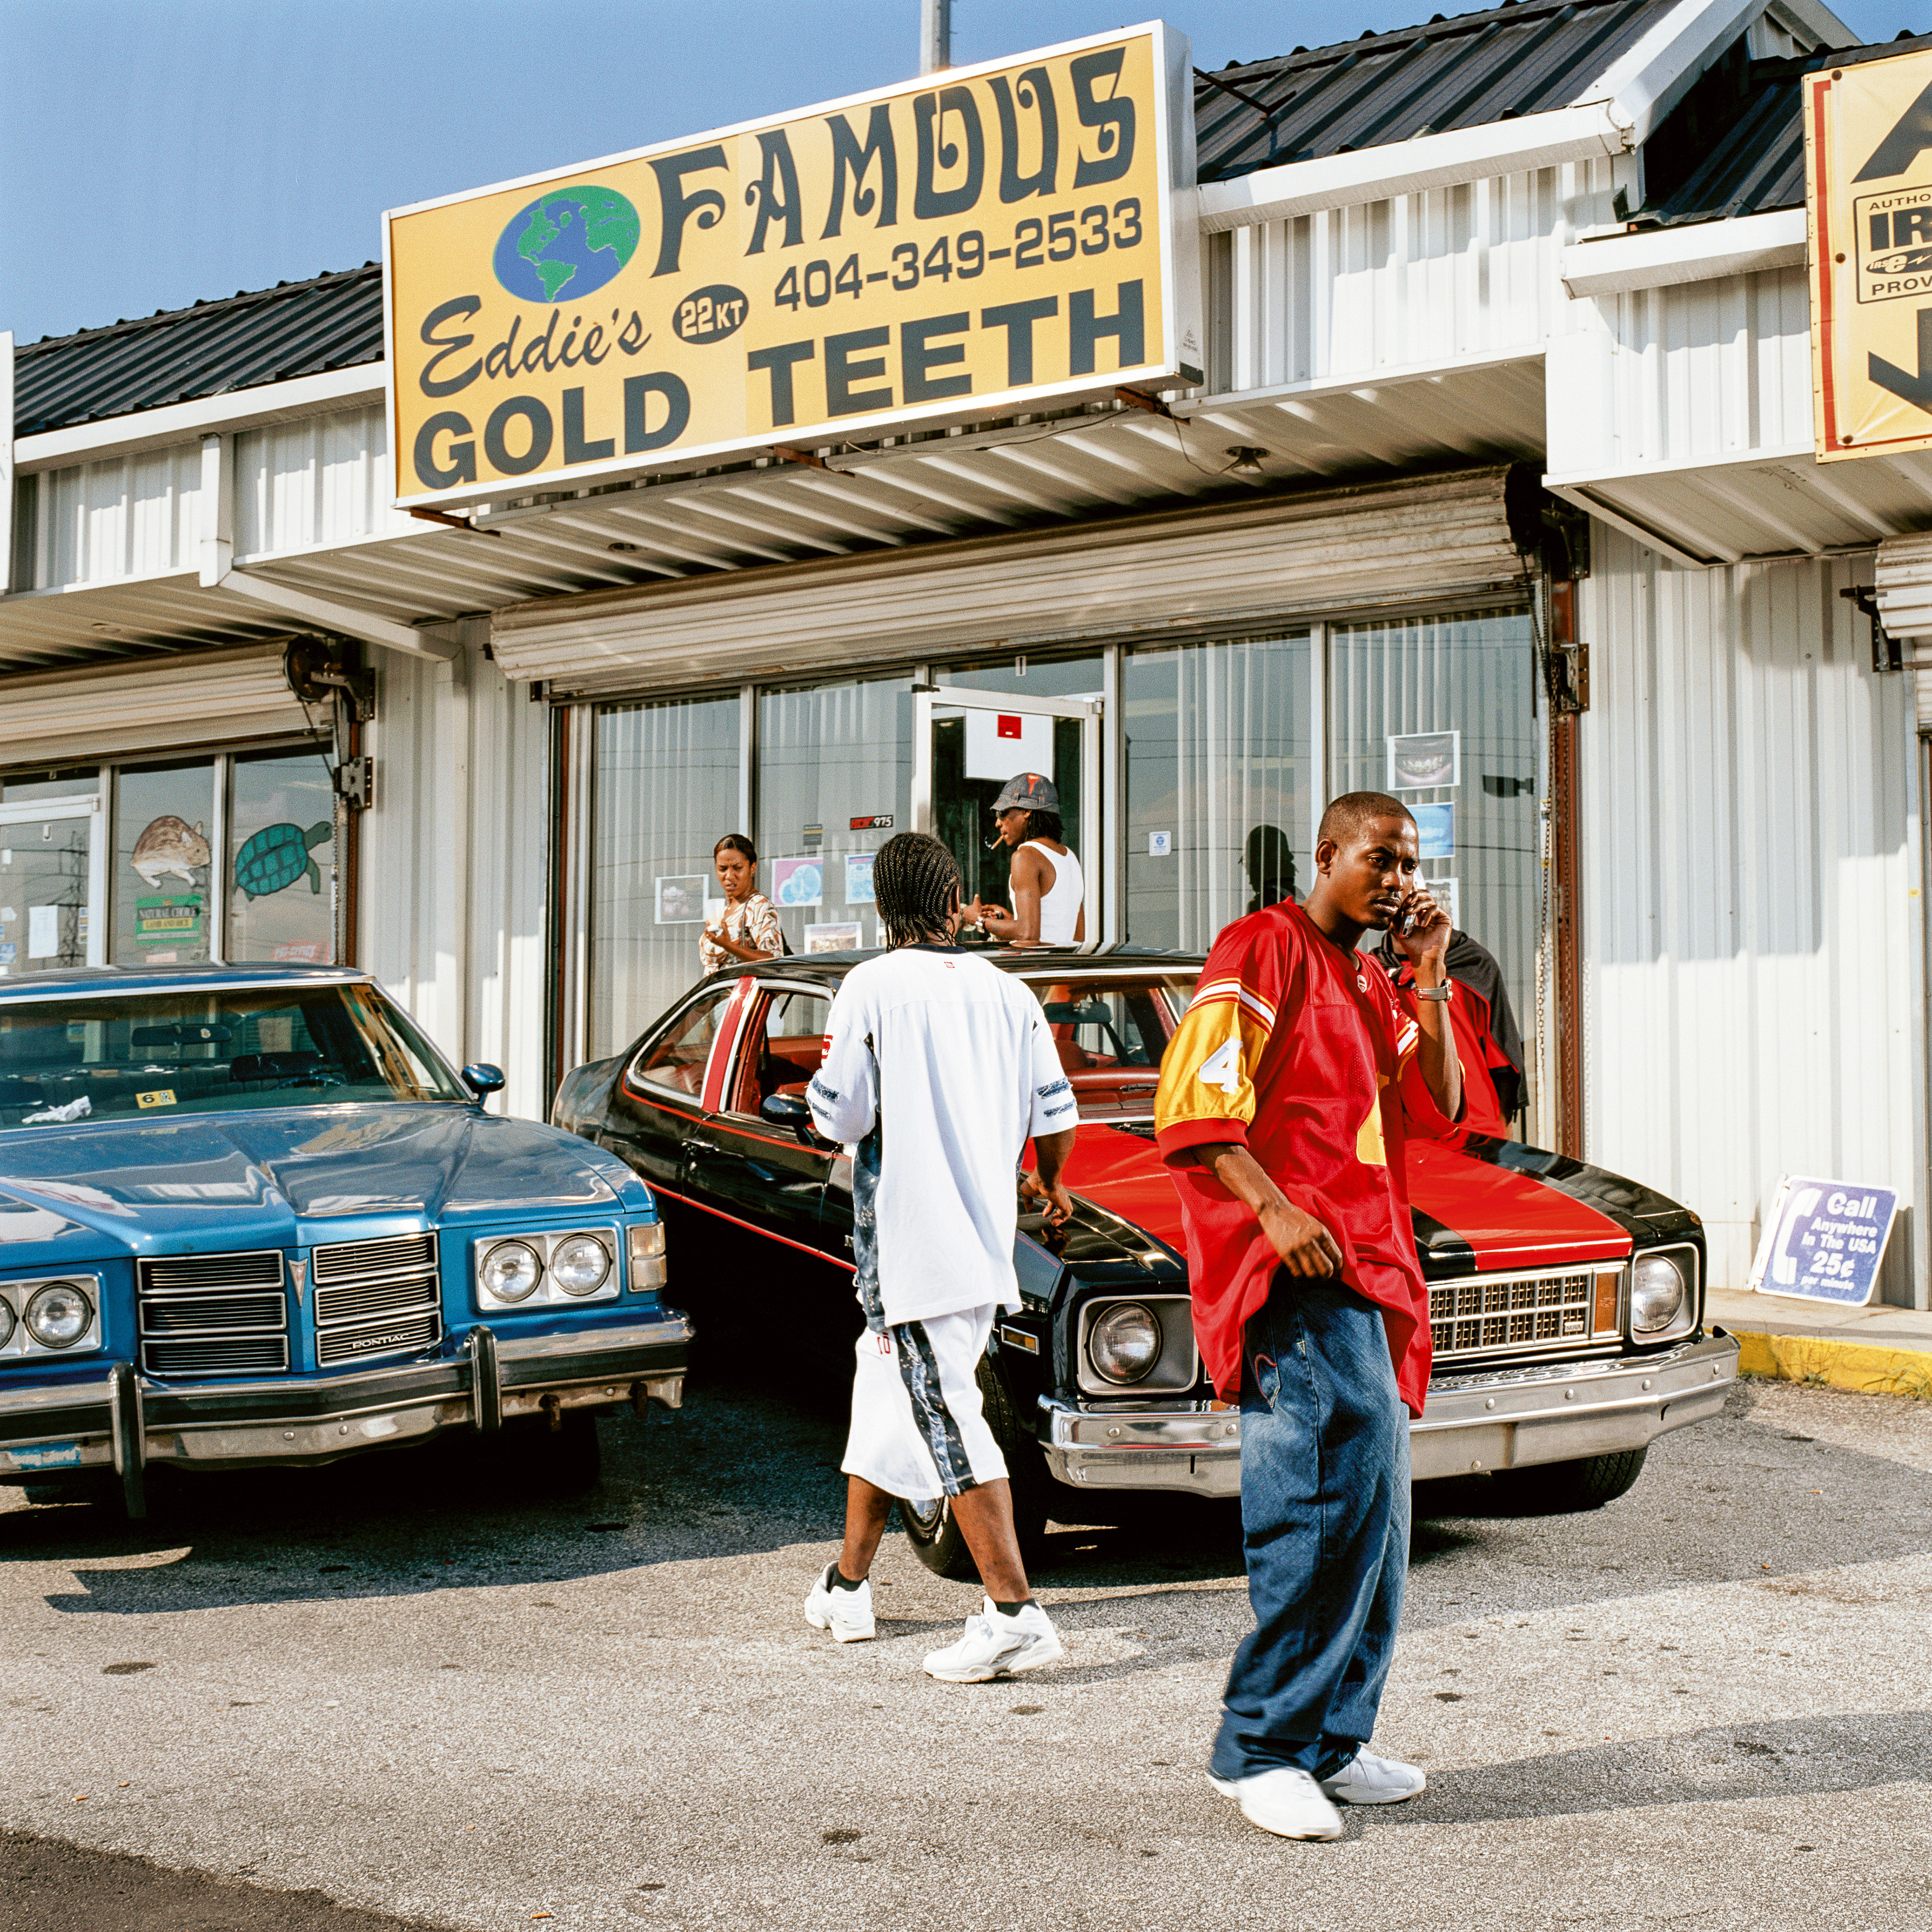 Eddie’s Gold Teeth/Famous Eddie’s Gold caps, front, slugs, grills... Call them what you will, Eddie Plein, a Surinamese immigrant in Brooklyn, took gold teeth to new levels. Setting up shop starting in the 1980s at the Colosseum Mall on 165th Street in Jamaica, Queens, Plein eventually relocated to Atlanta, influencing the Southern embrace of grills culture.